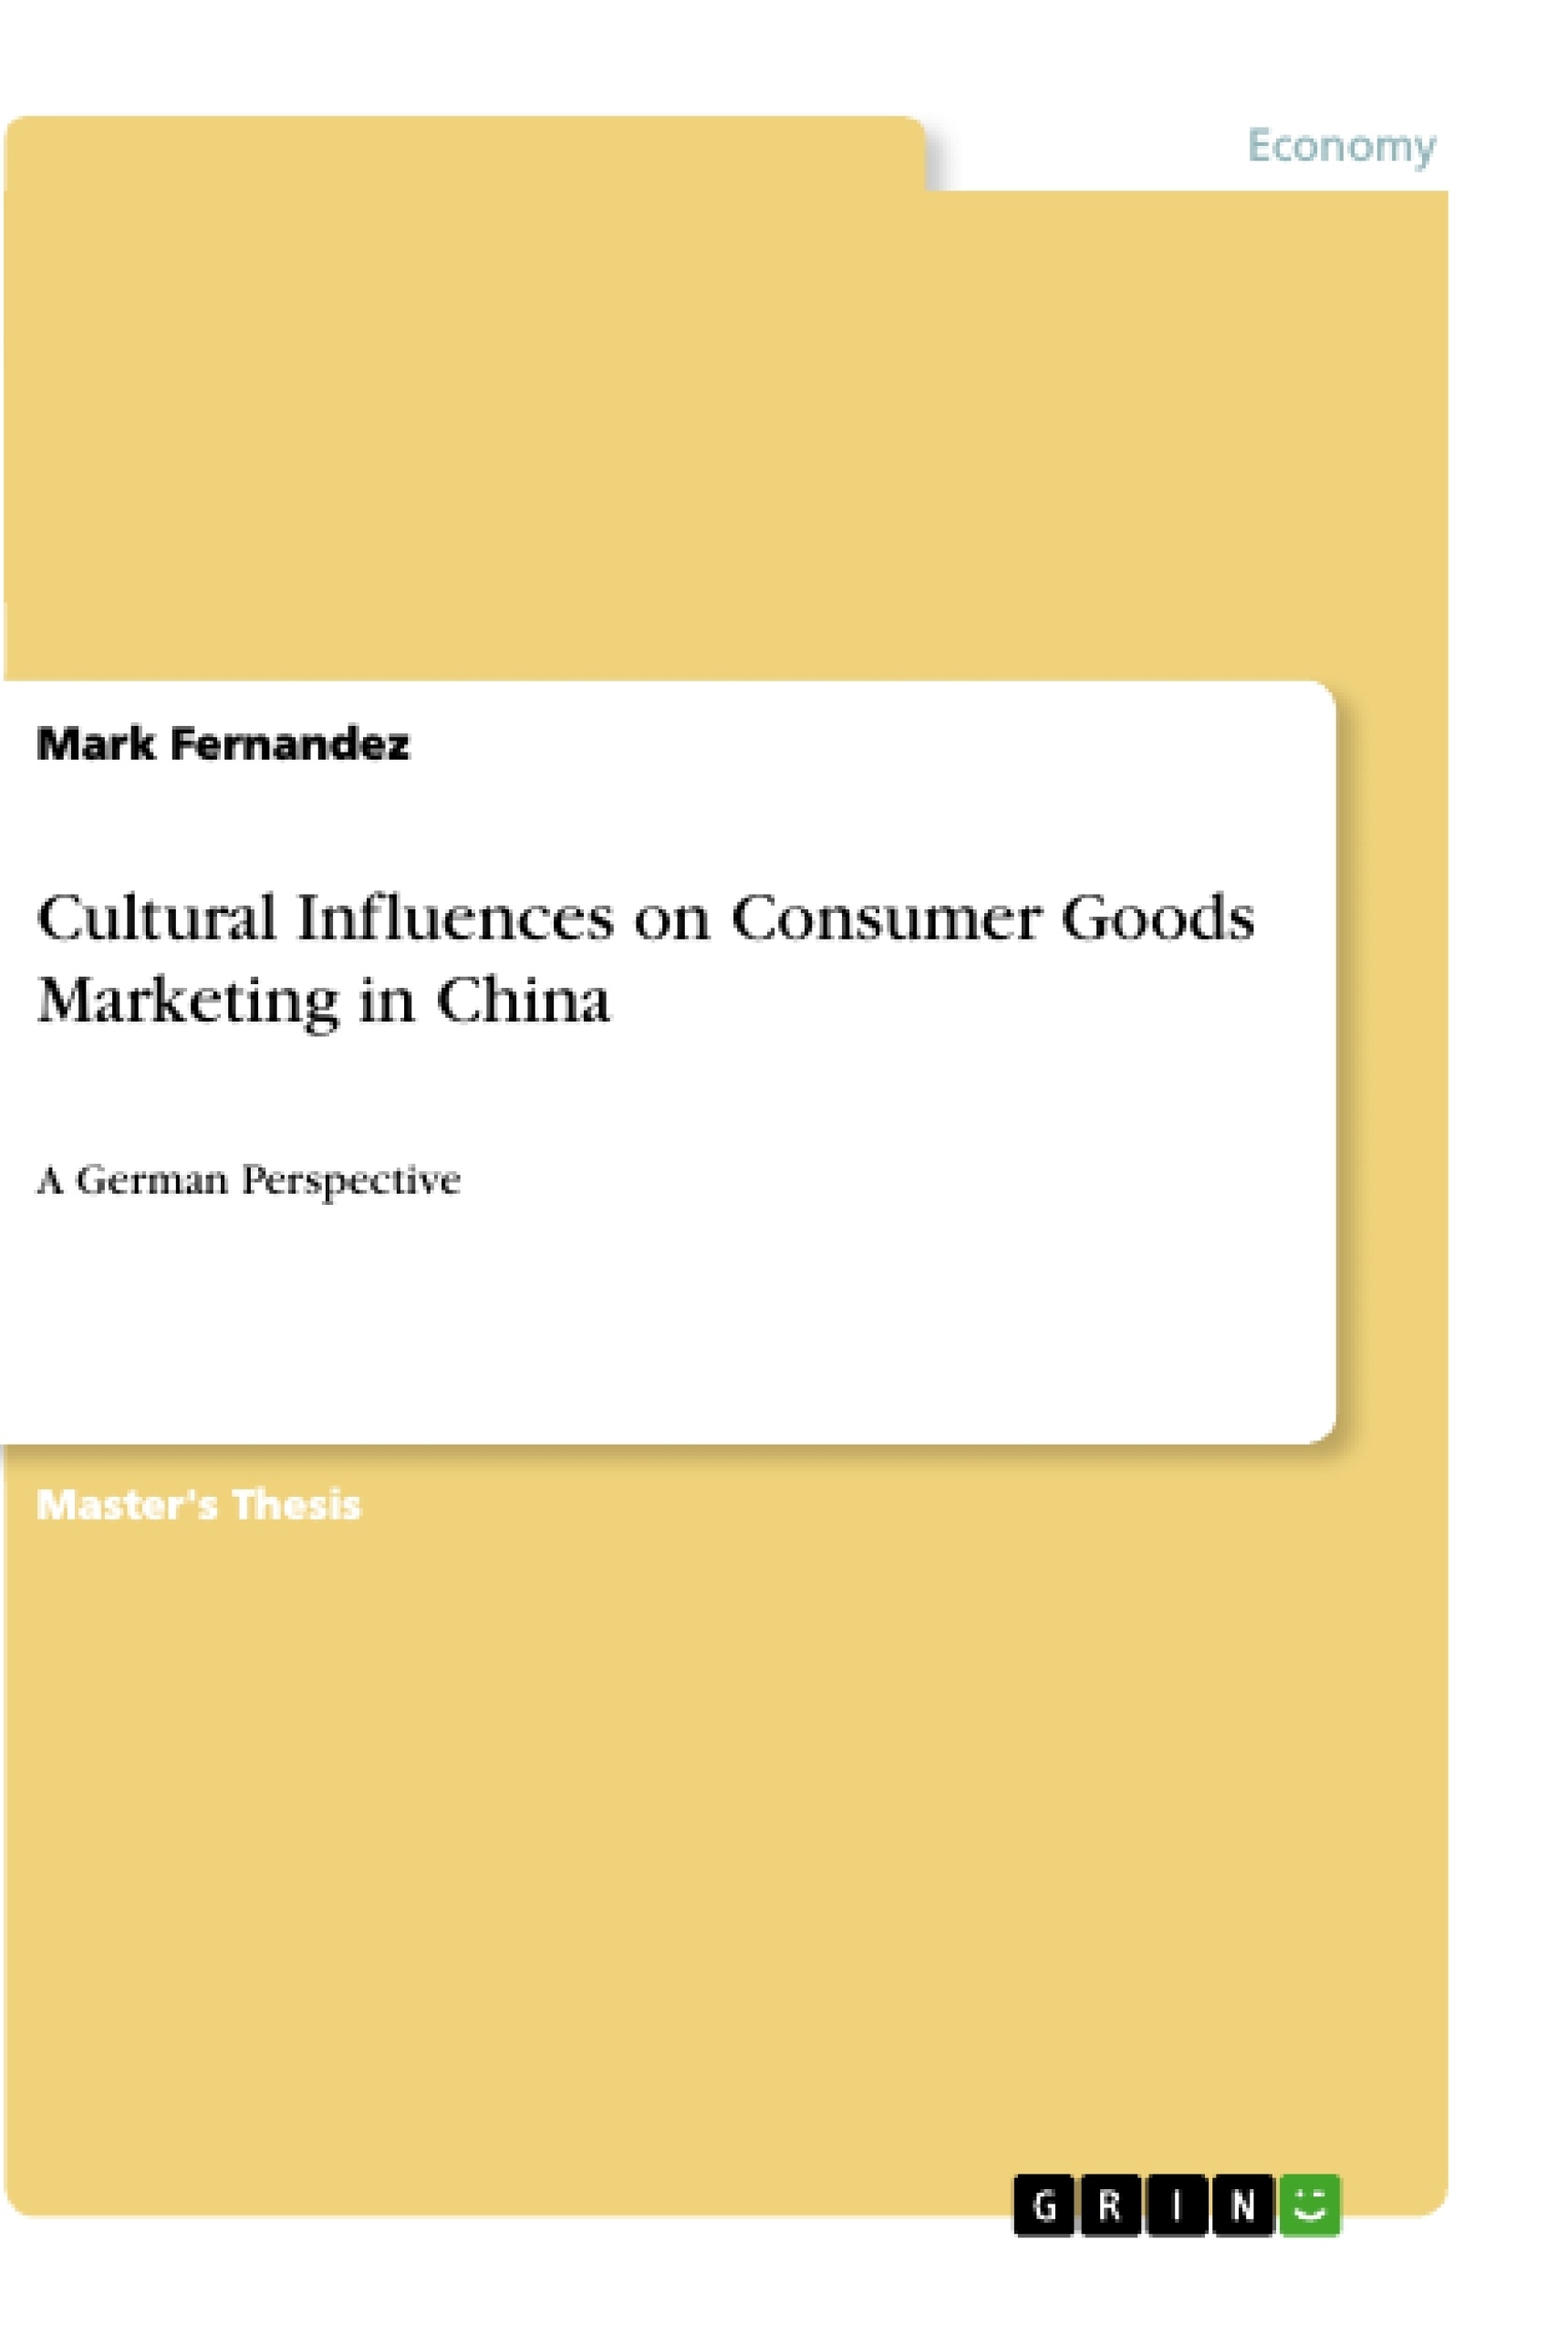 Title: Cultural Influences on Consumer Goods Marketing in China